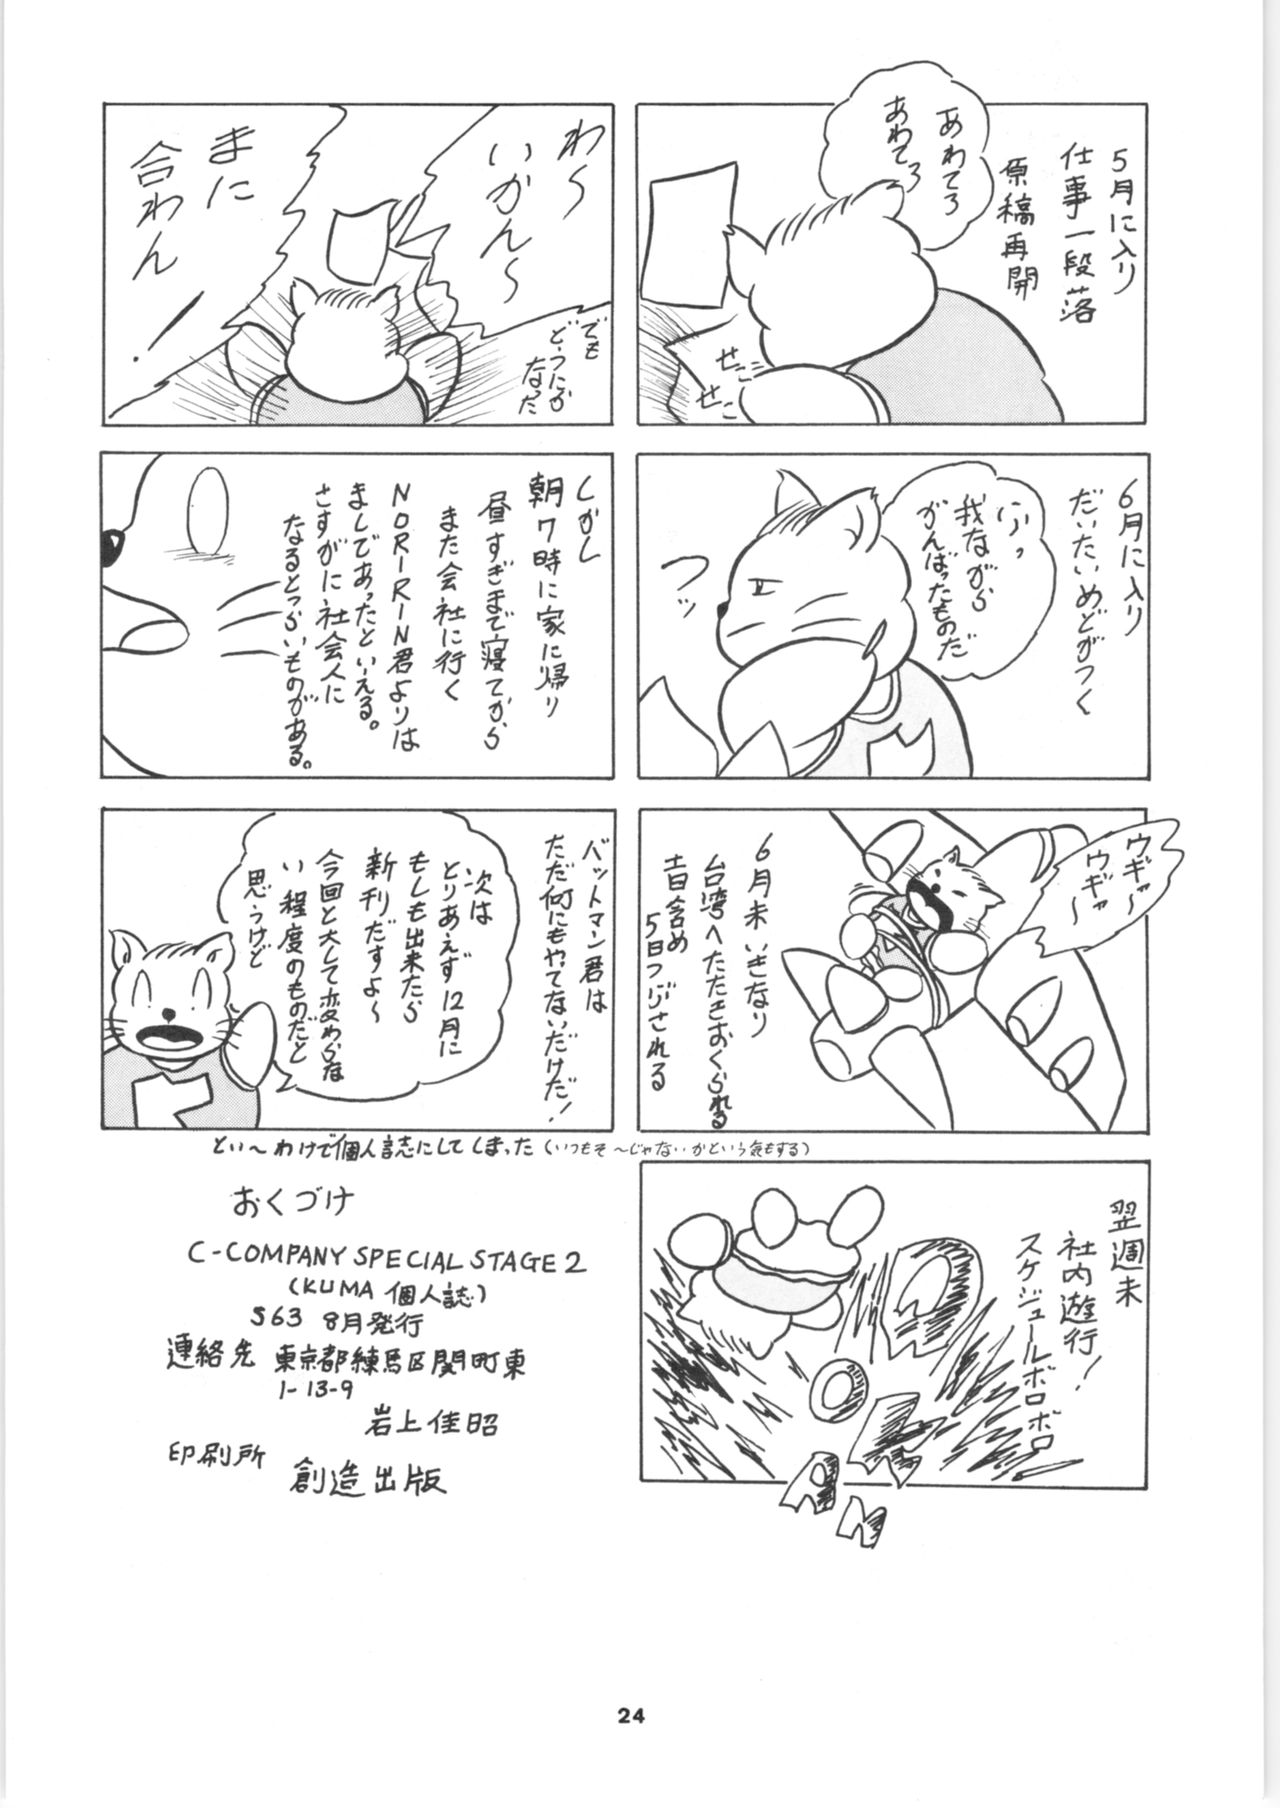 [C-COMPANY] C-COMPANY SPECIAL STAGE 2 (Ranma 1/2) page 25 full